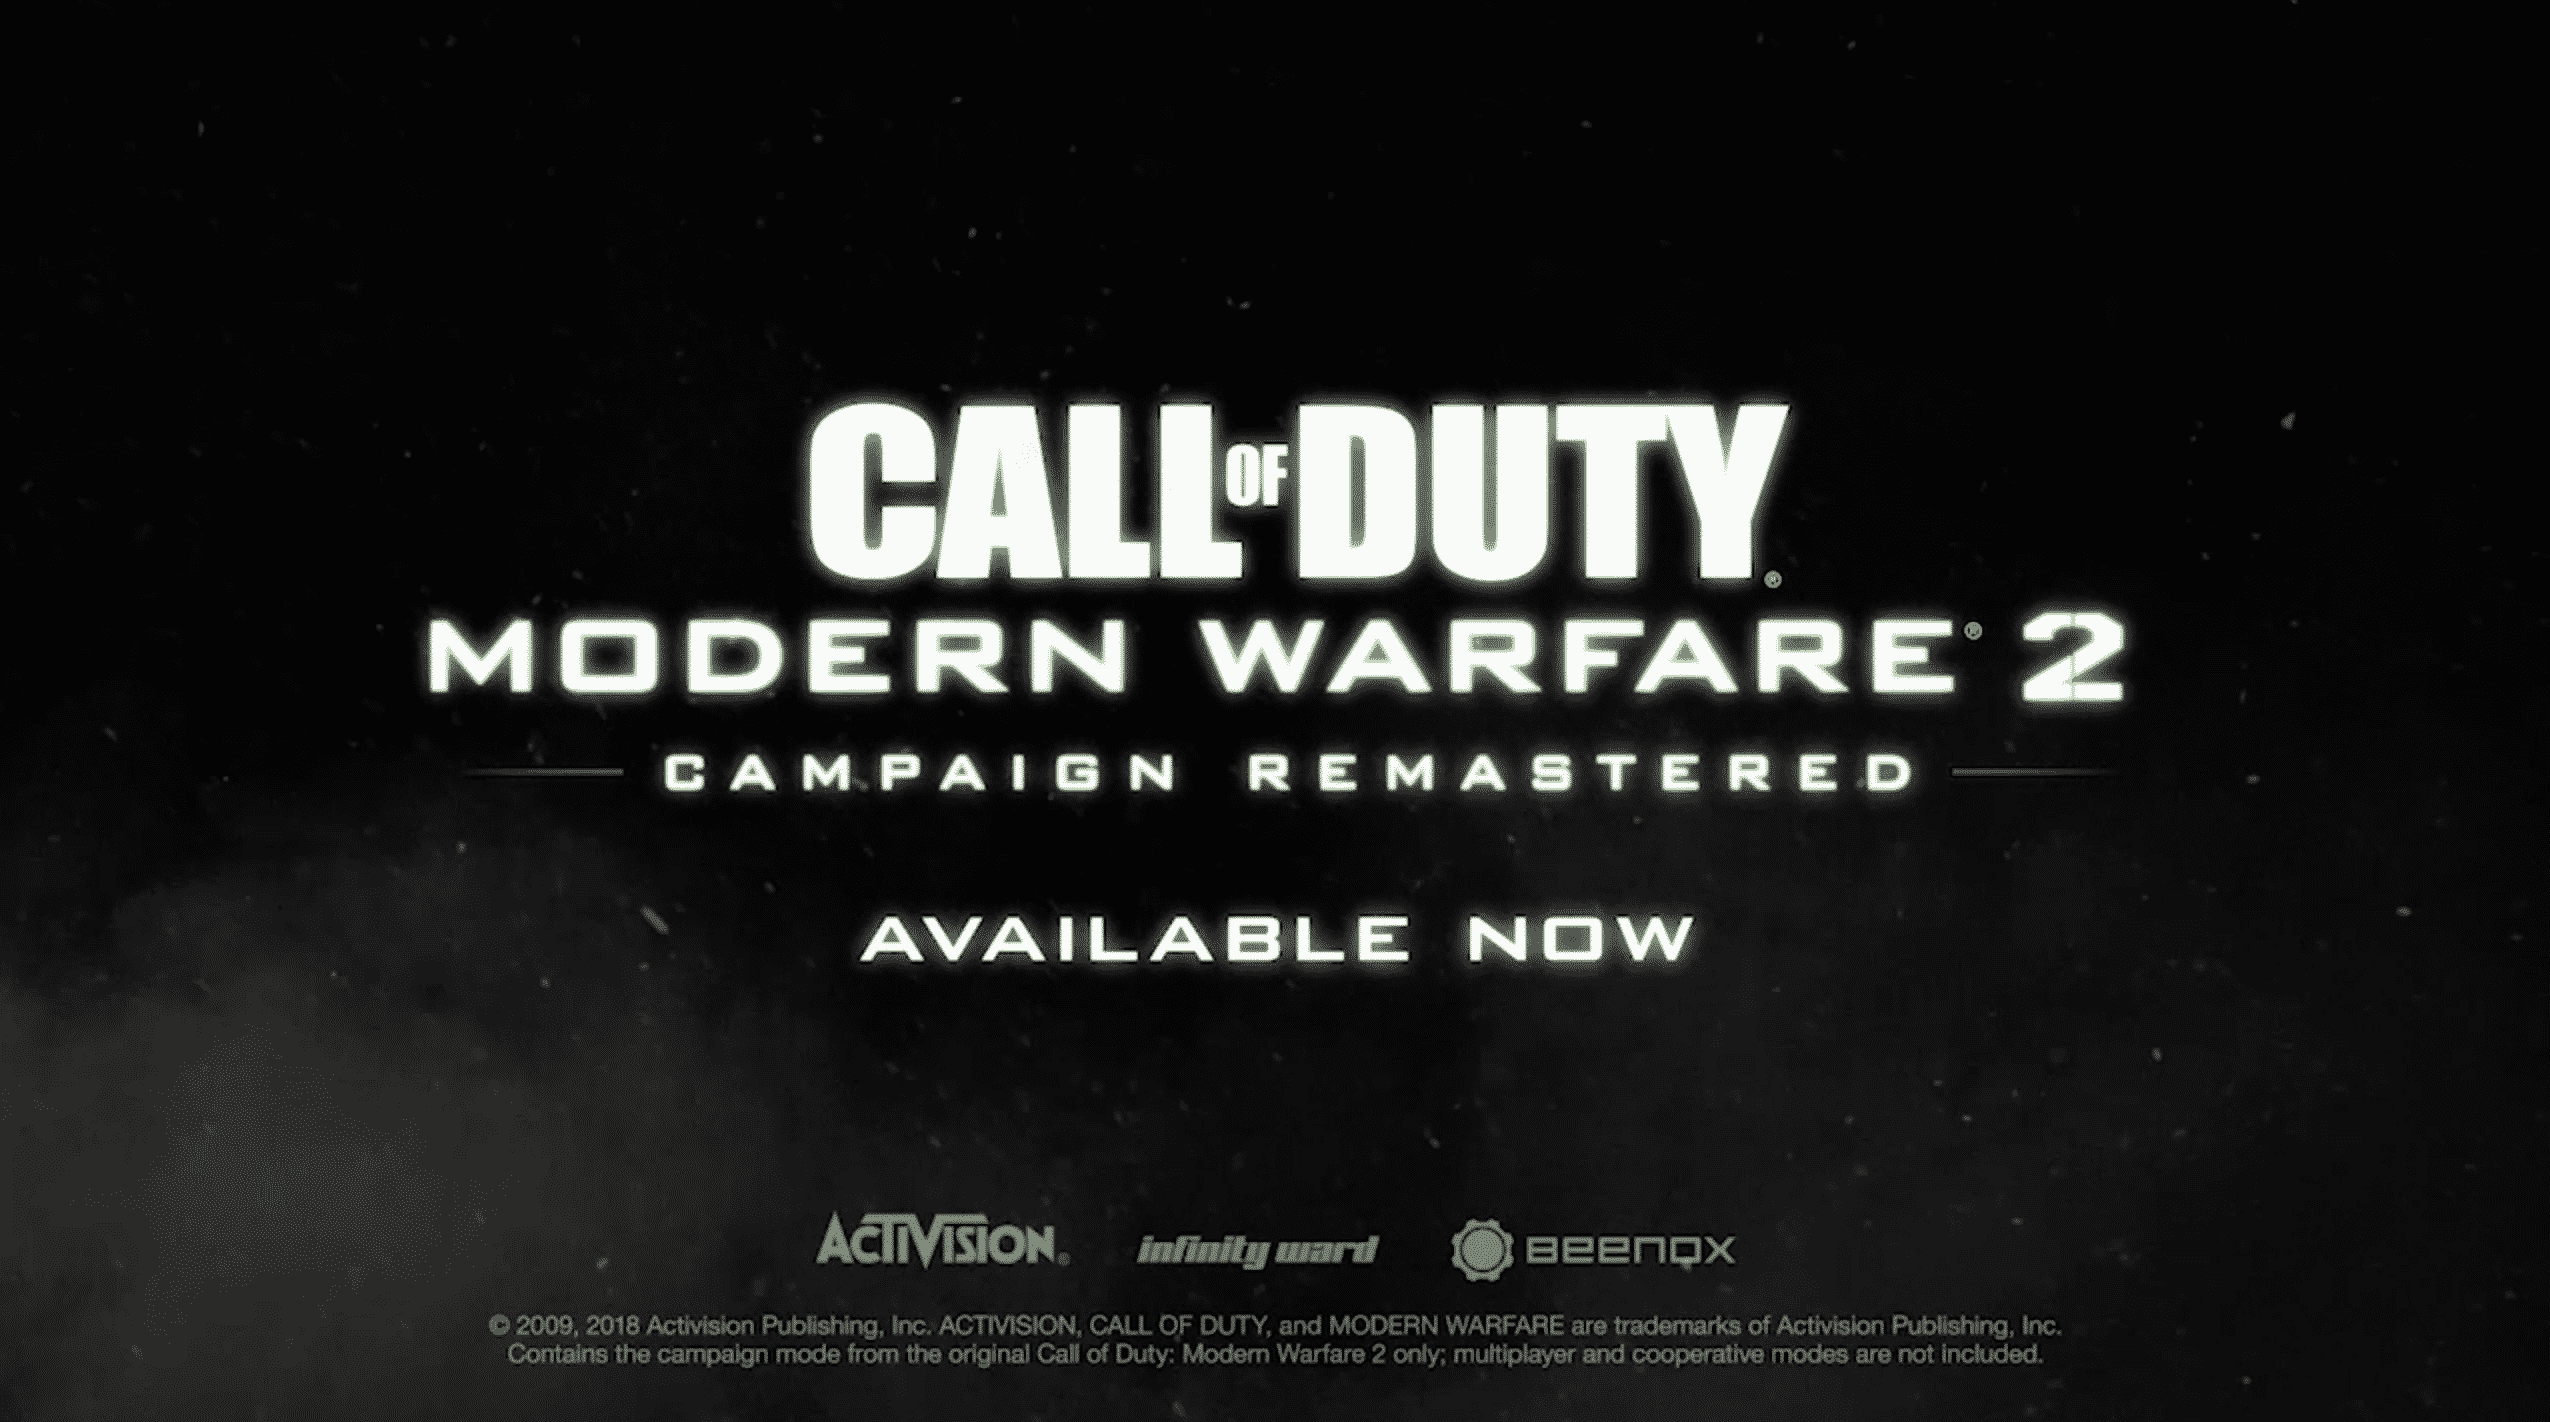 Call Of Duty: Modern Warfare 2 Campaign Remastered is out today